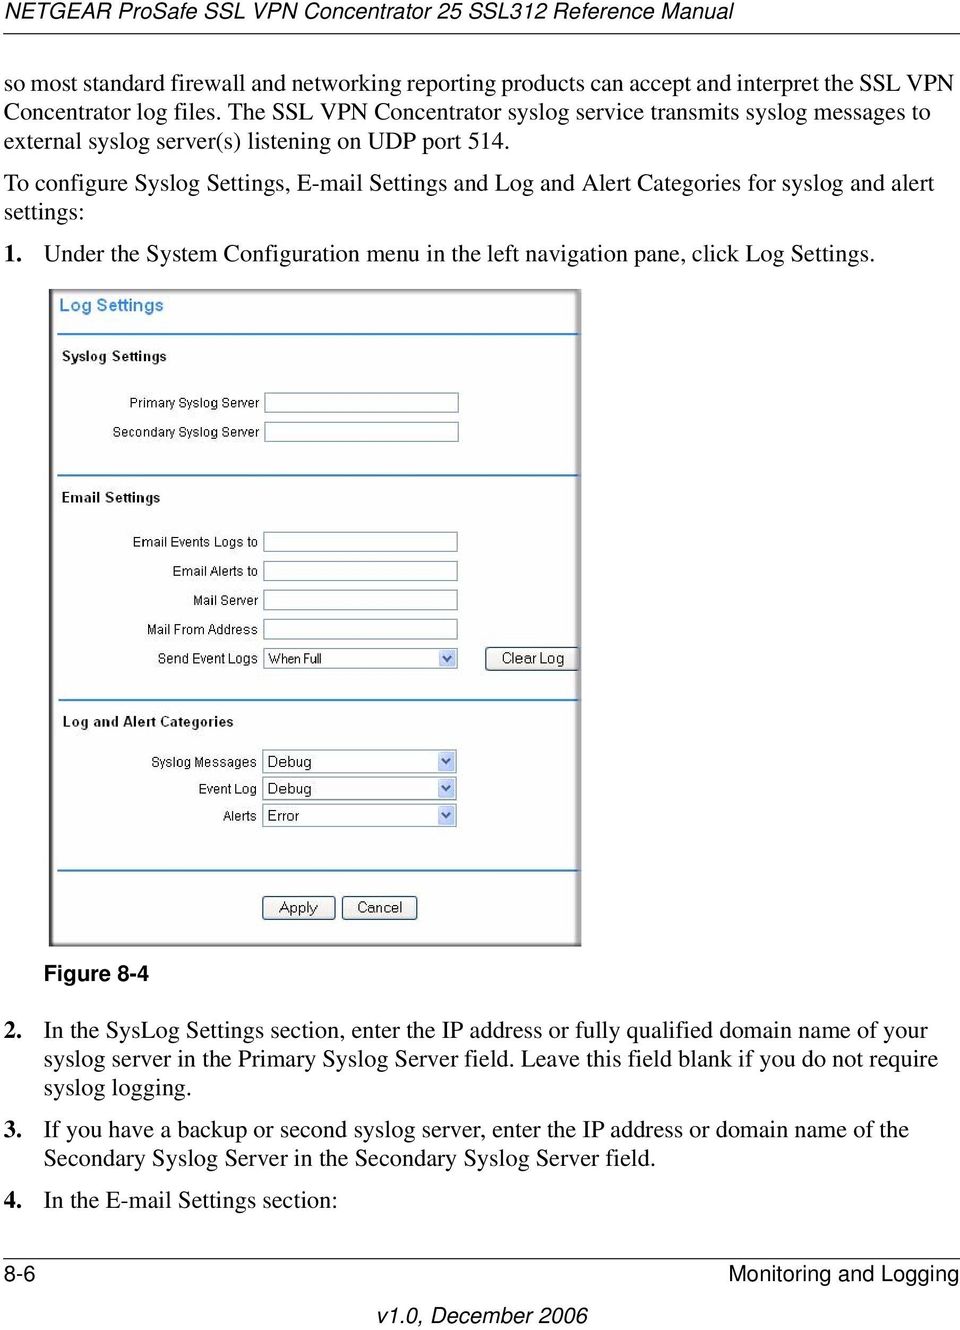 To configure Syslog Settings, E-mail Settings and Log and Alert Categories for syslog and alert settings: 1. Under the System Configuration menu in the left navigation pane, click Log Settings.